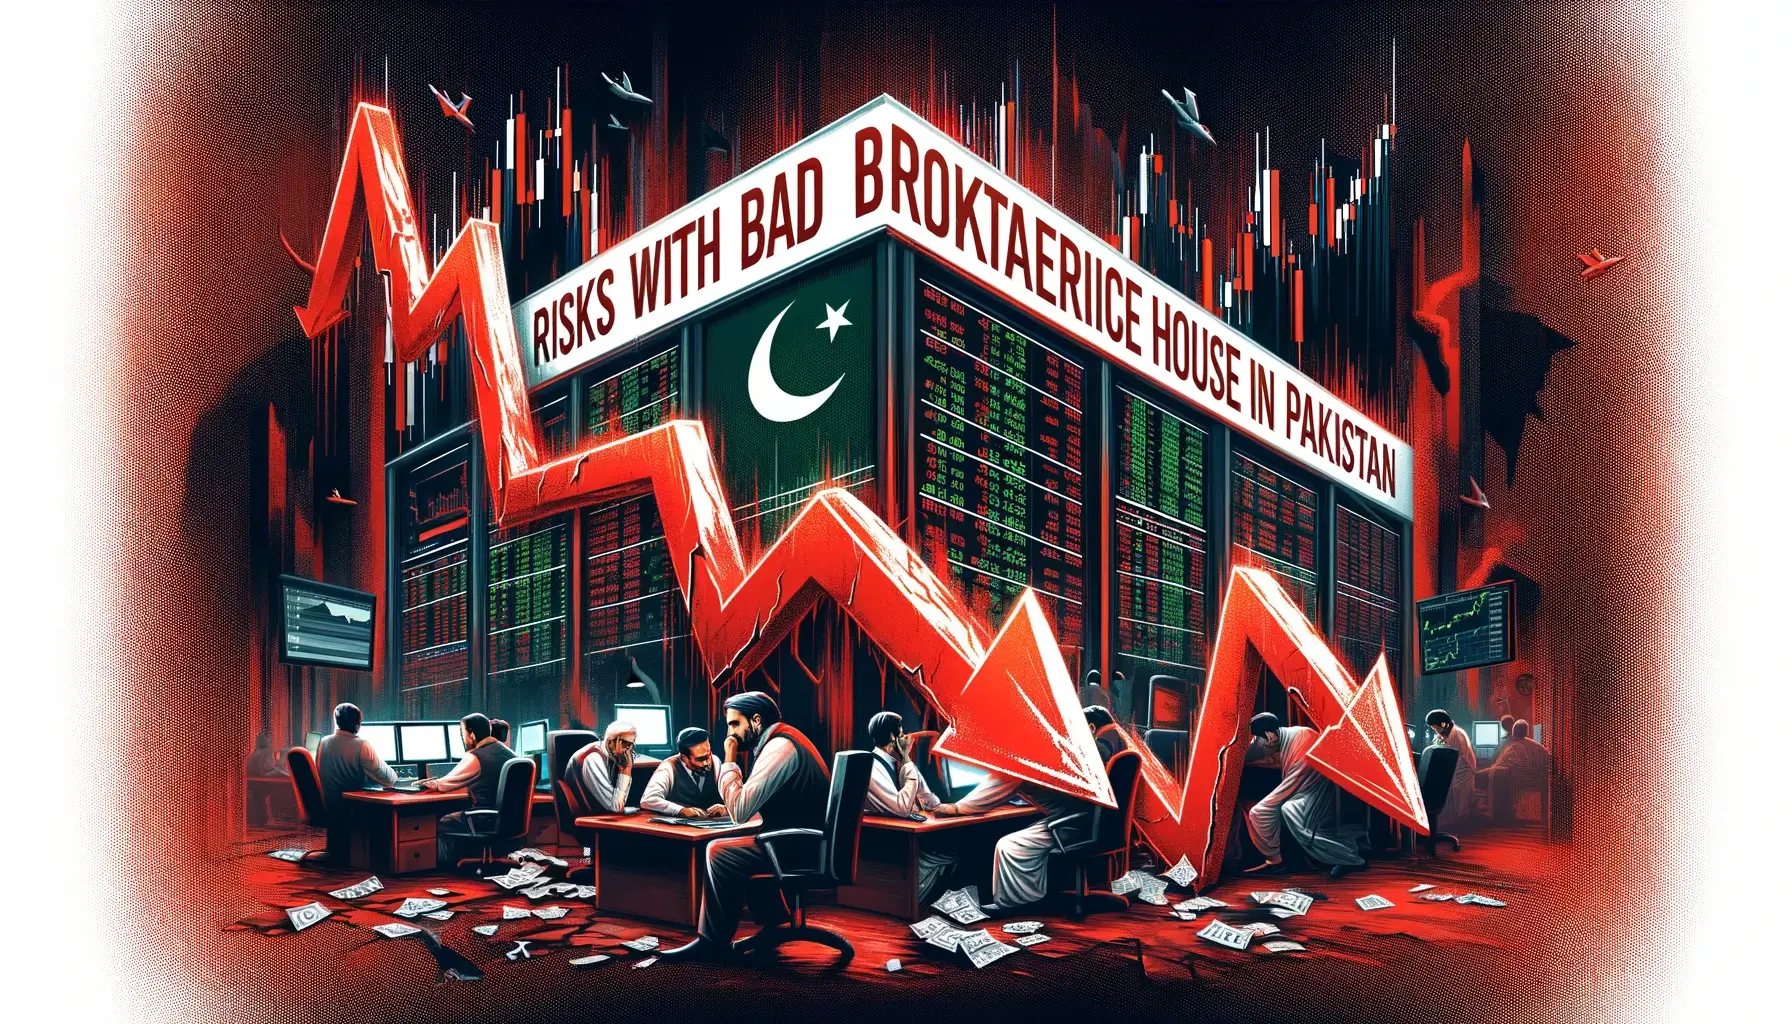 Risks With Bad Brokerage House in Pakistan